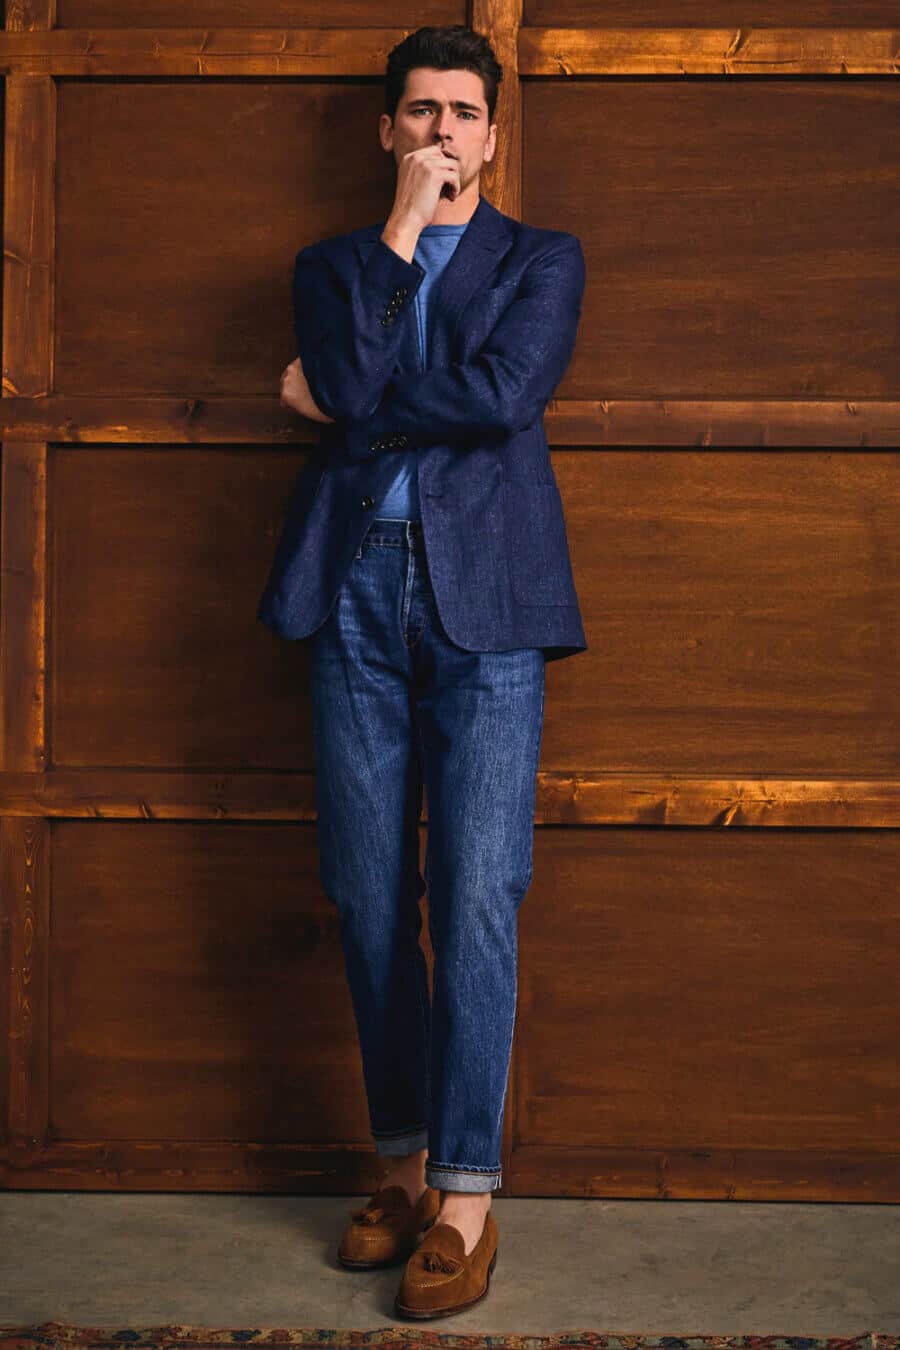 Men's linen blazer with jeans and loafers outfit